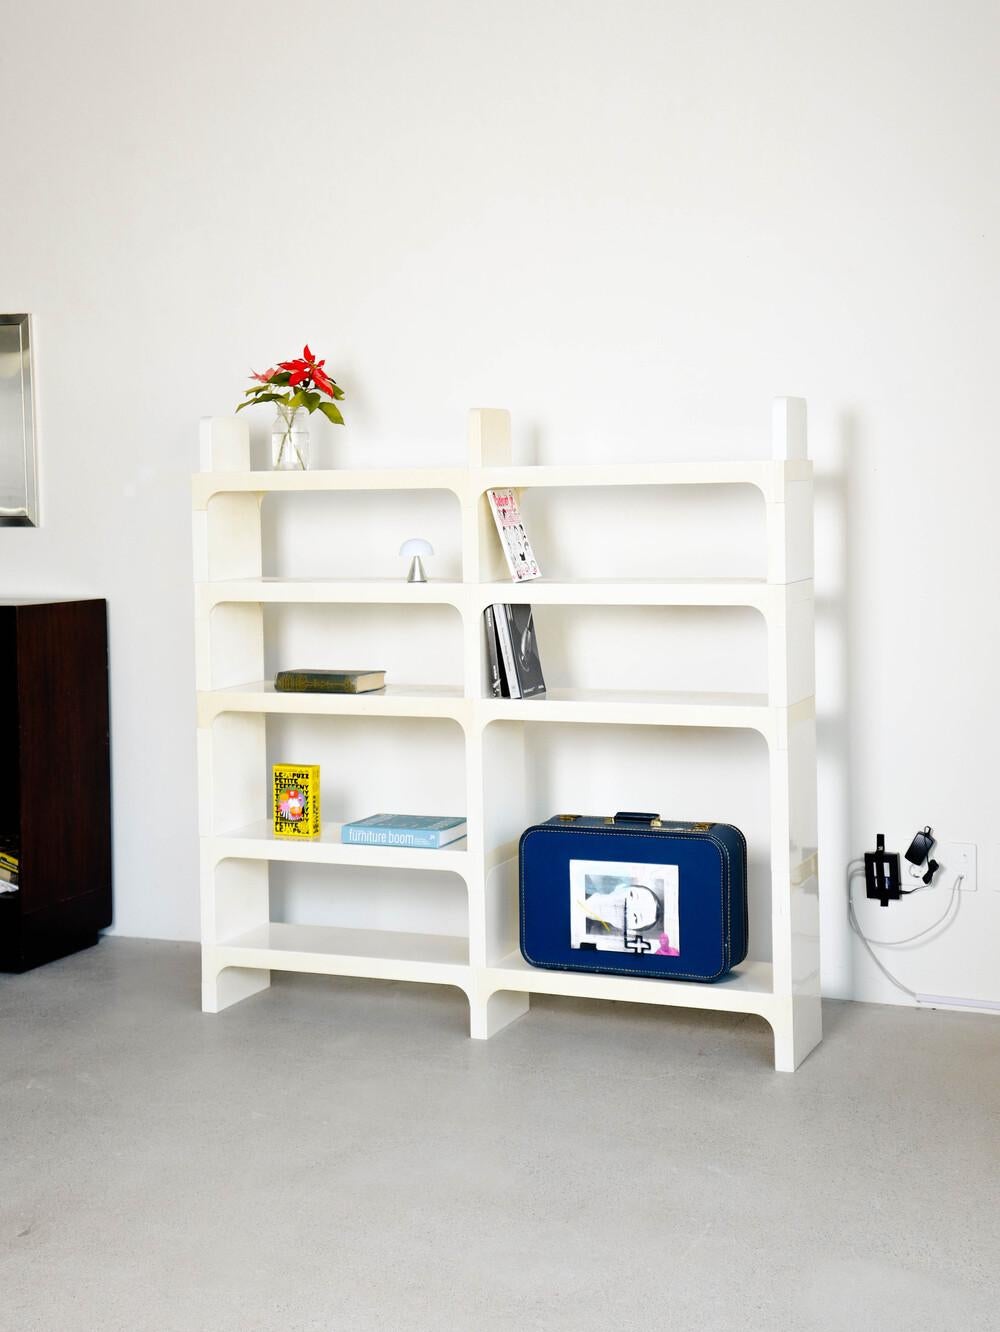 Space Age Olaf Von Bohr ABS Plastic Bookcase for Kartell